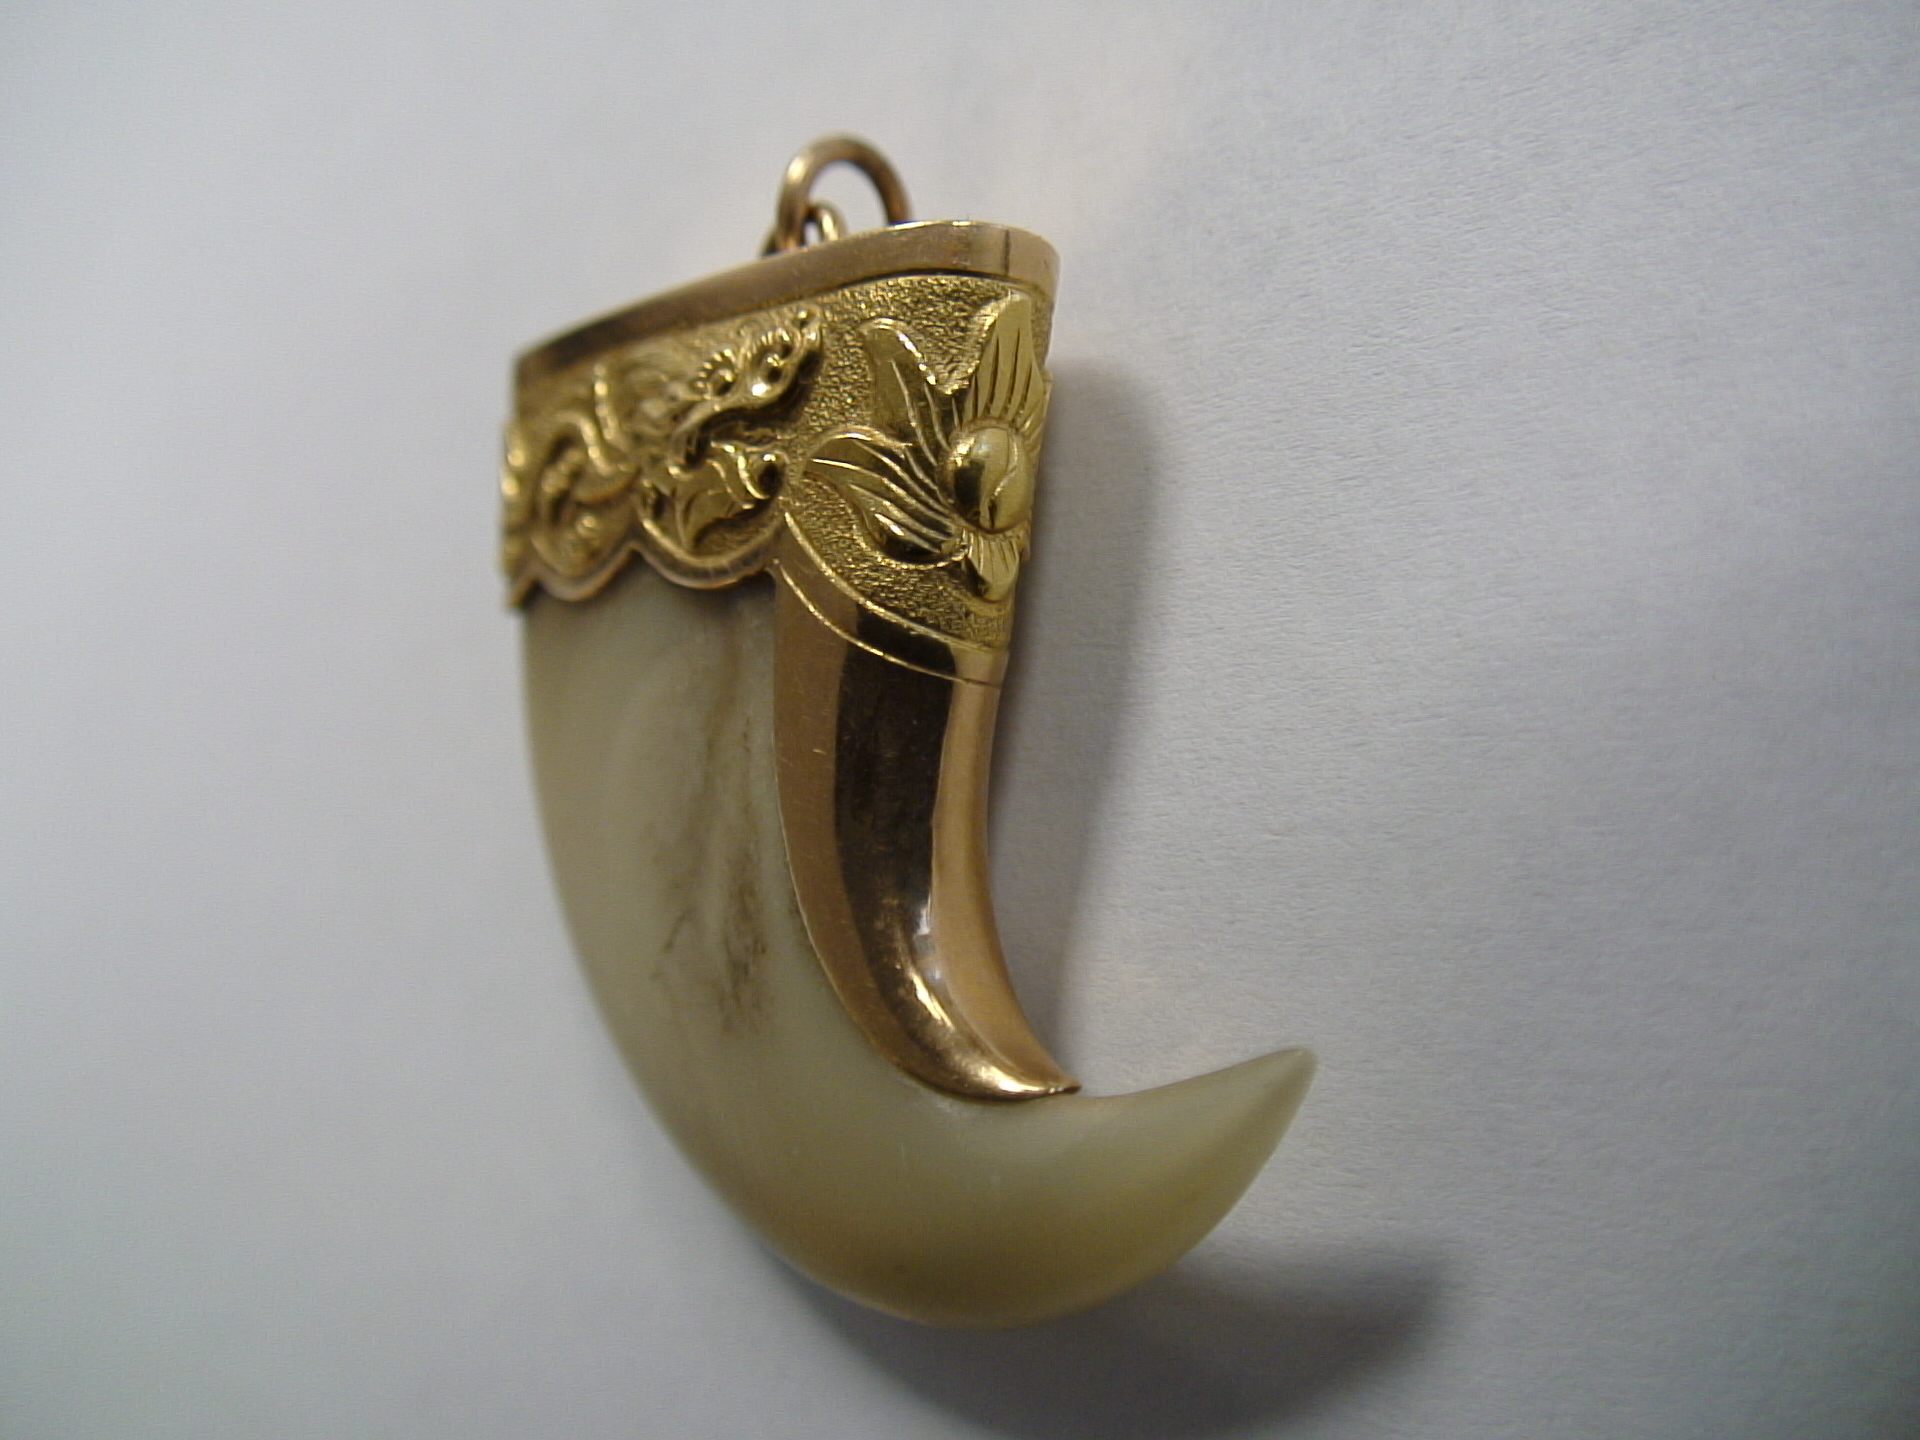 Brood X. Bach's Equipment Gold-tiger-claw-pendant